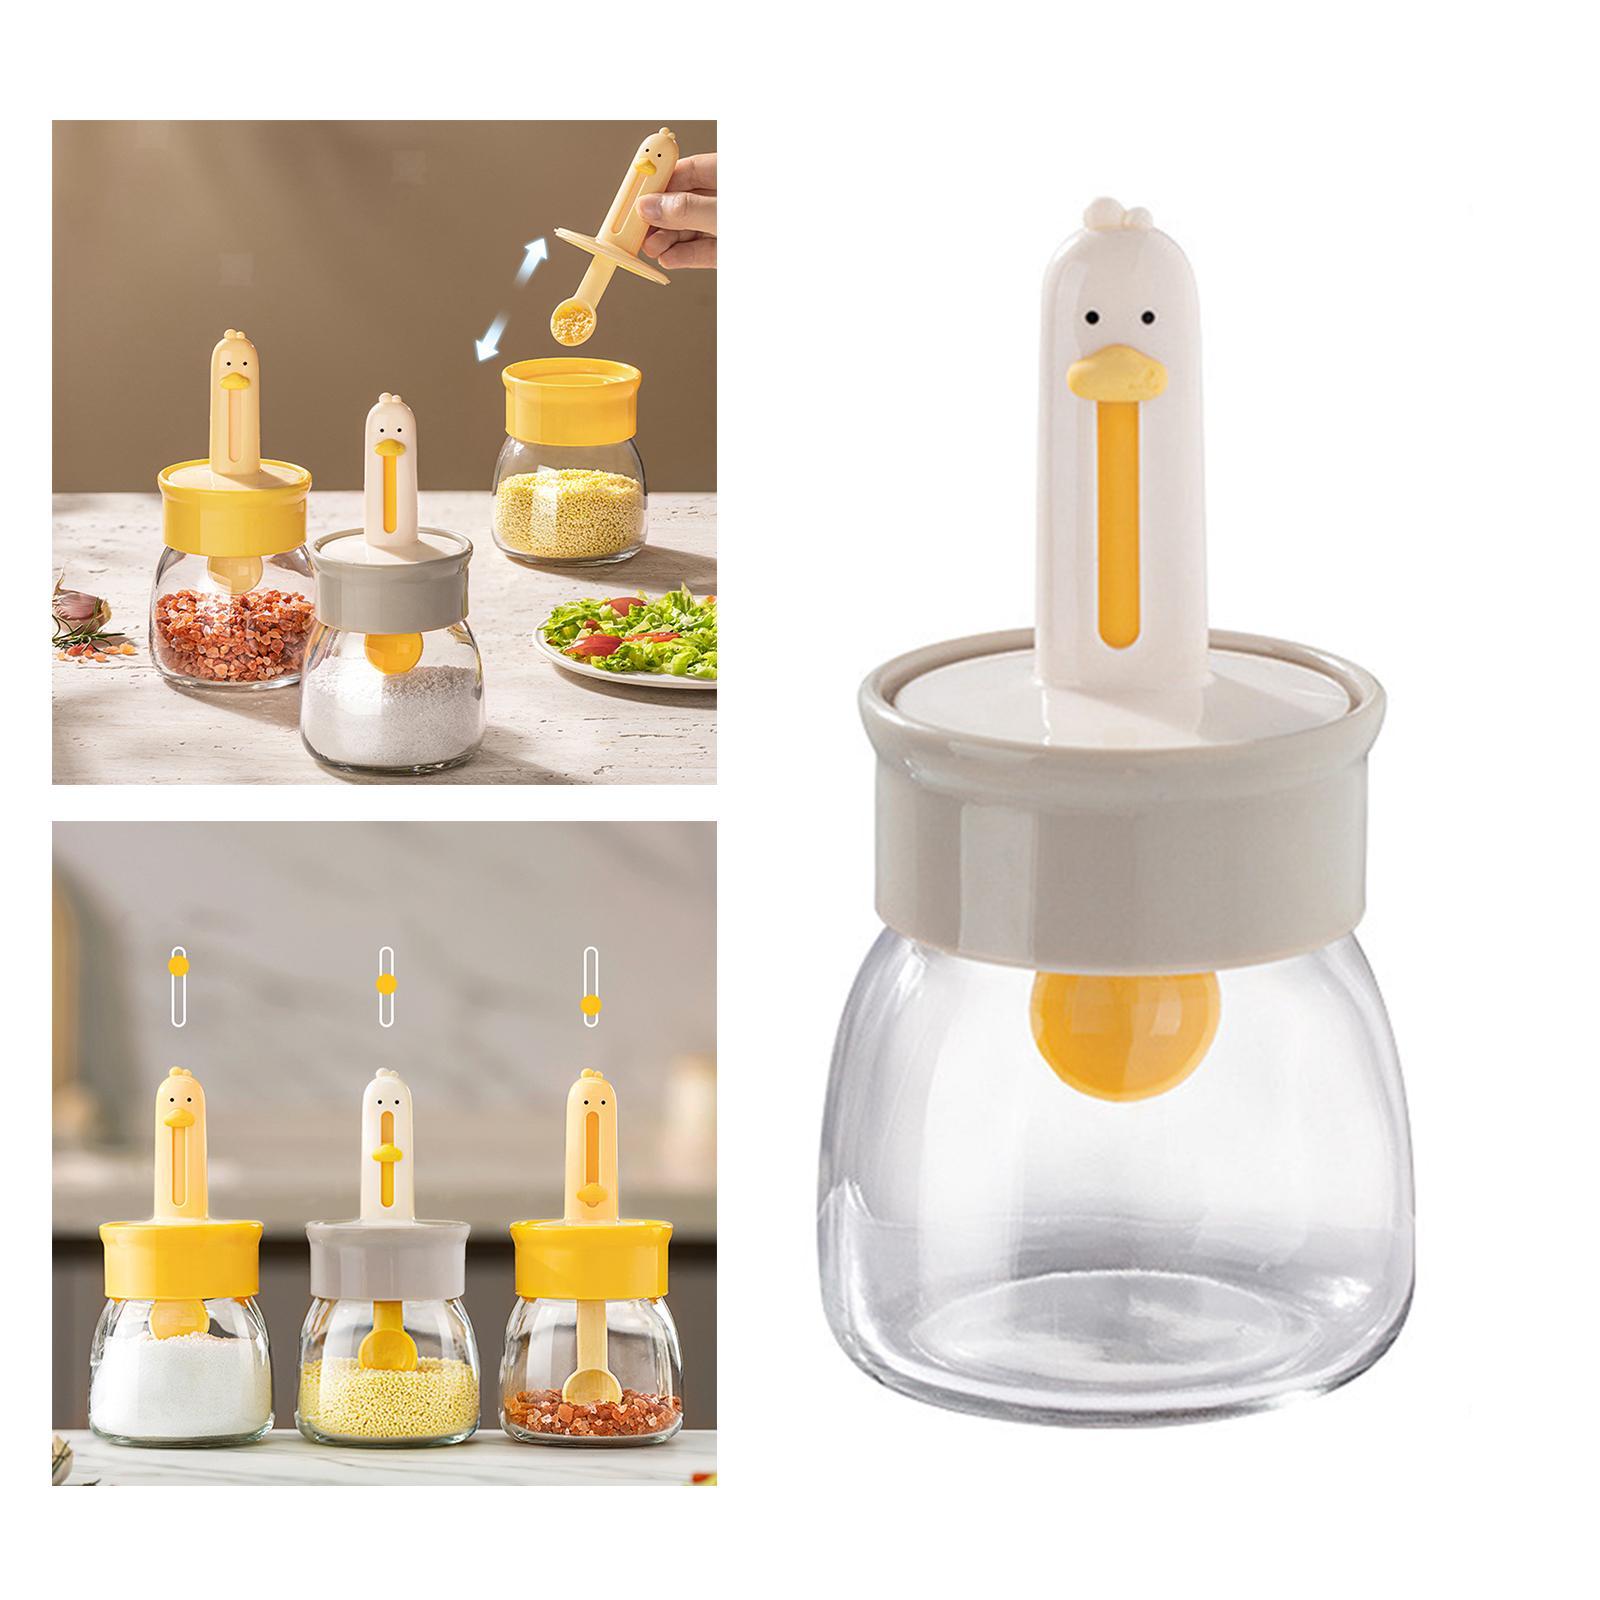 Condiment Container, Spice Bottle, Sugar, Salt Container, Seasoning Case, Salt and Pepper Shaker, Seasoning Bottle, Stylish, Airtight, 10.1 fl oz (300 ml), Heat Resistant Glass Container,